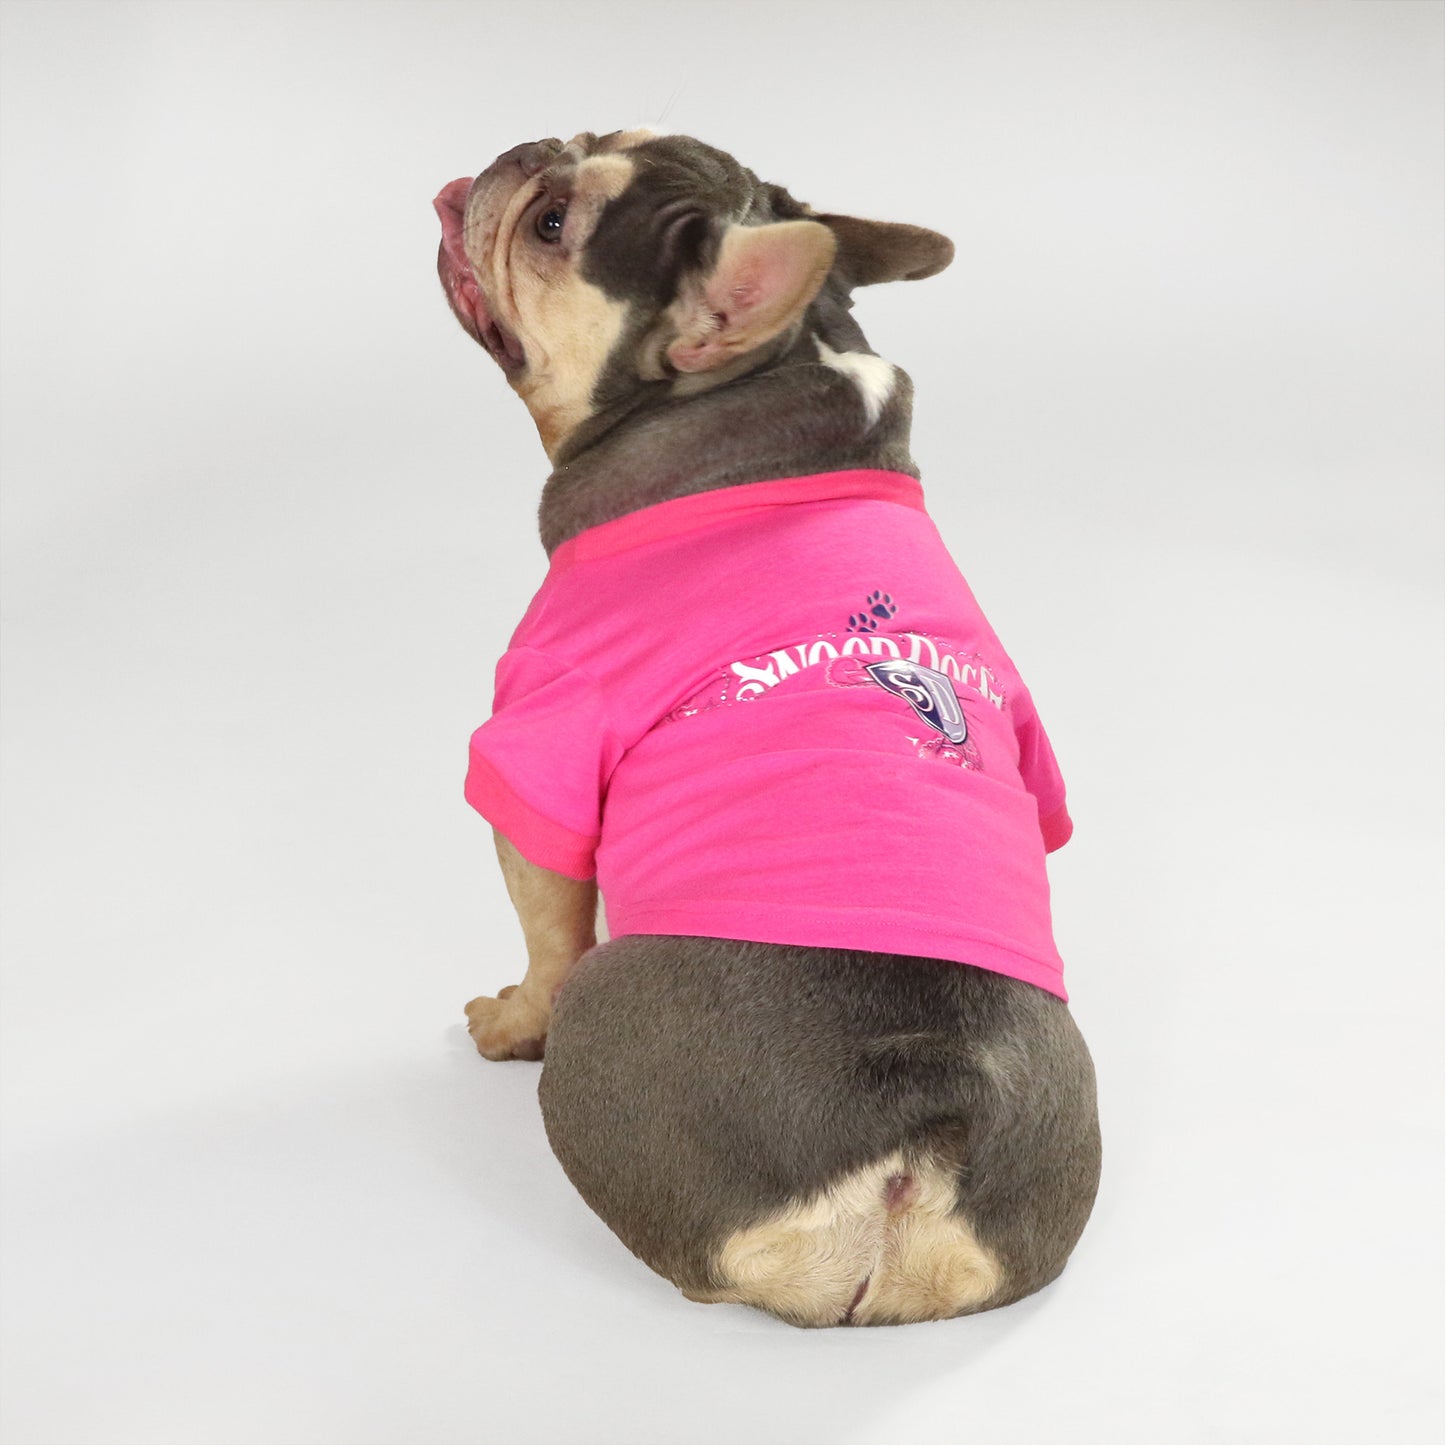 Chunky Monkey the French Bulldog wearing the Boss Lady Deluxe Pet T-Shirt in size Medium.